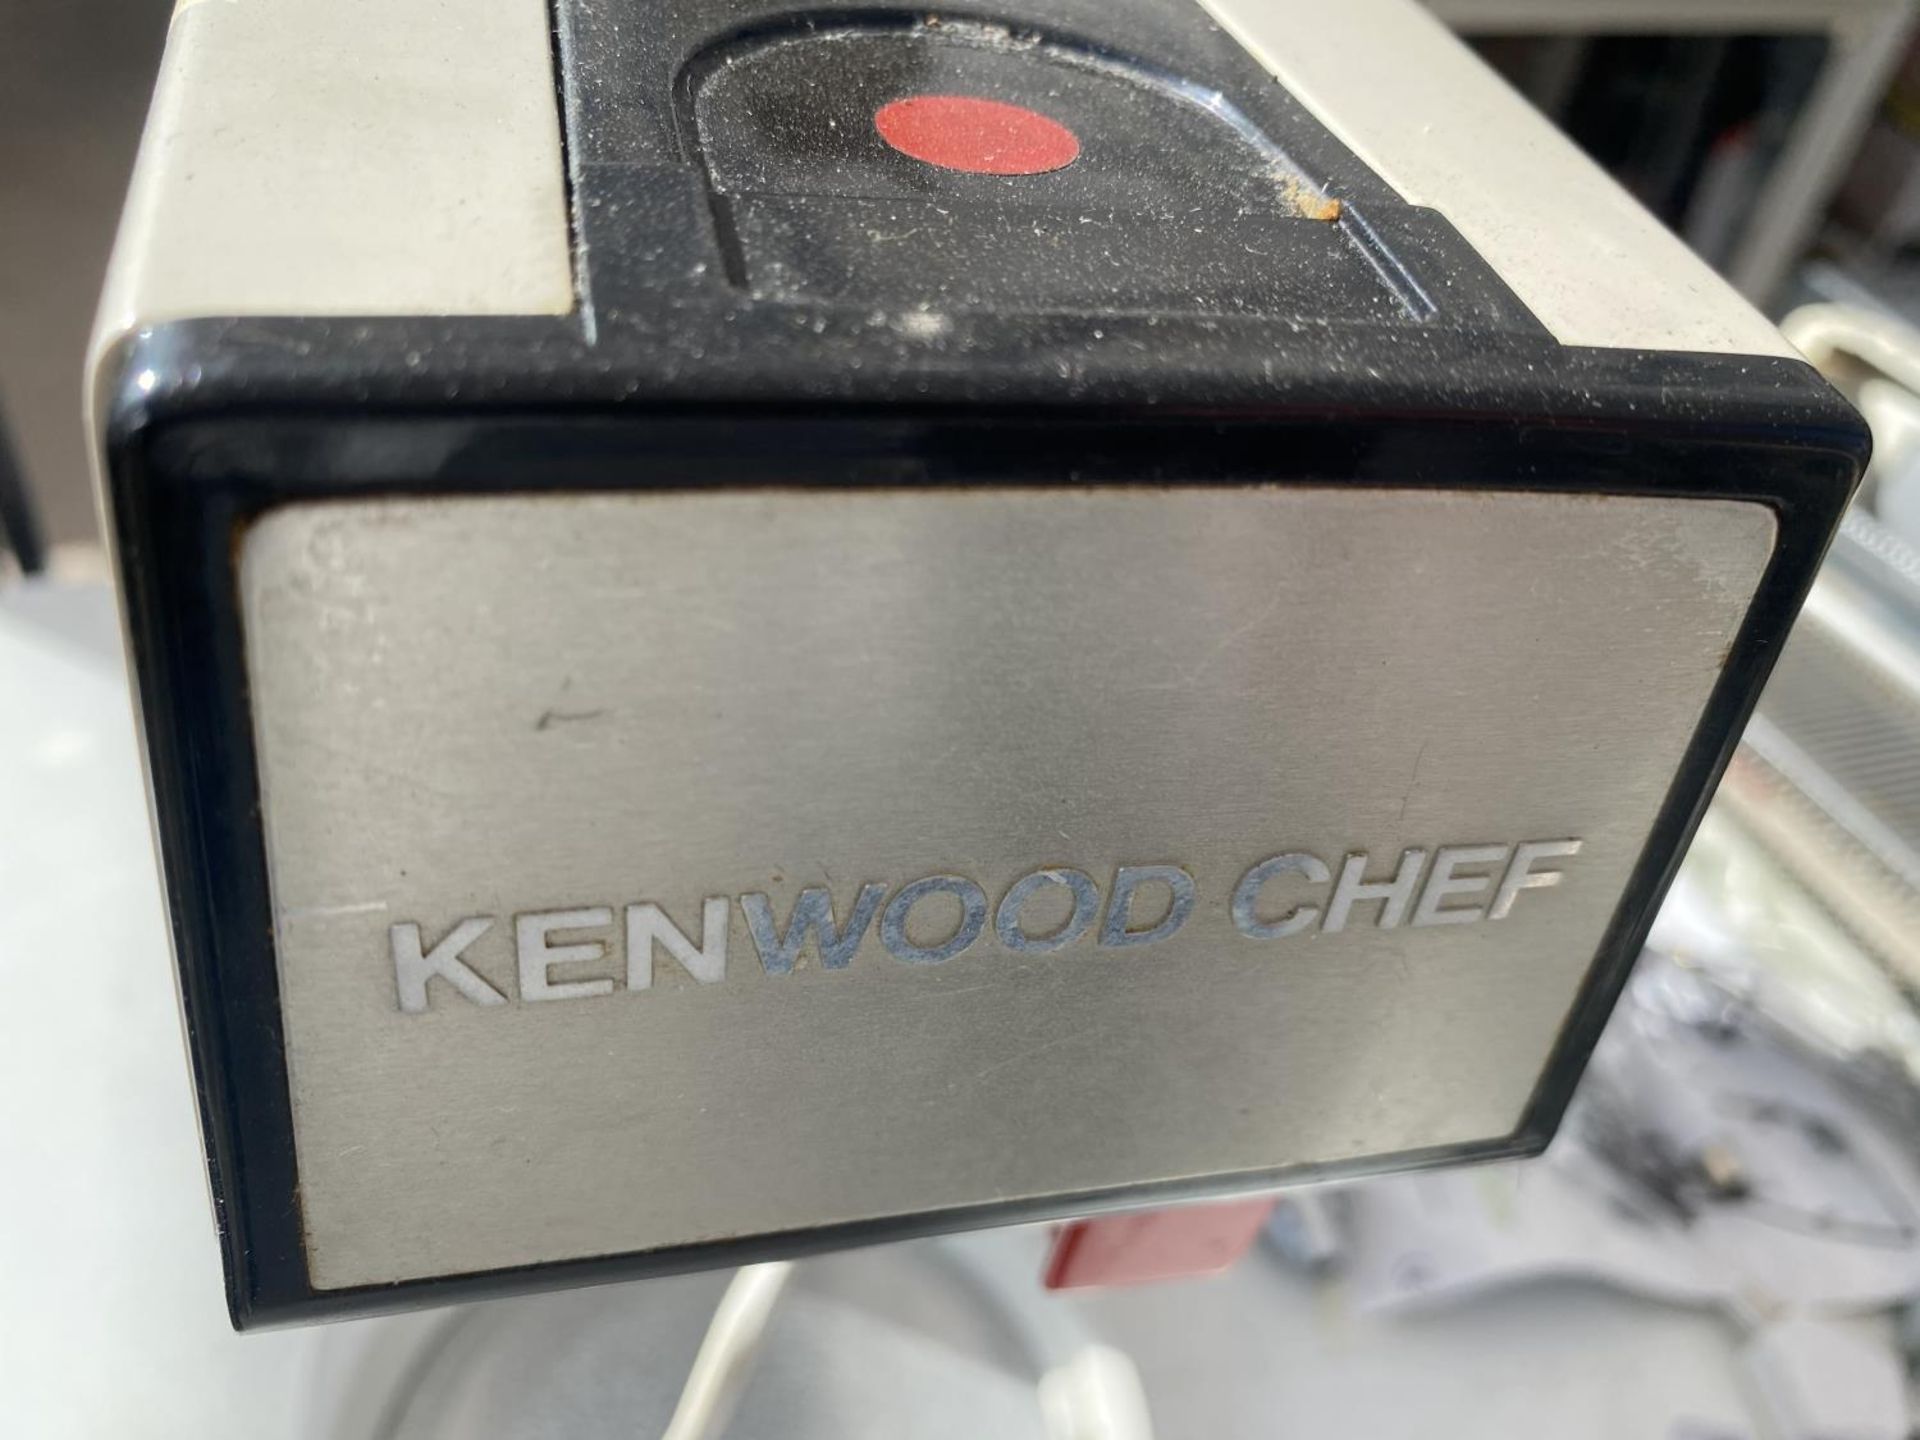 A KENWOOD CHEF WITH ATTATCHMENTS BELIEVED IN WORKING ORDER BUT NO WARRANTY - Image 3 of 3